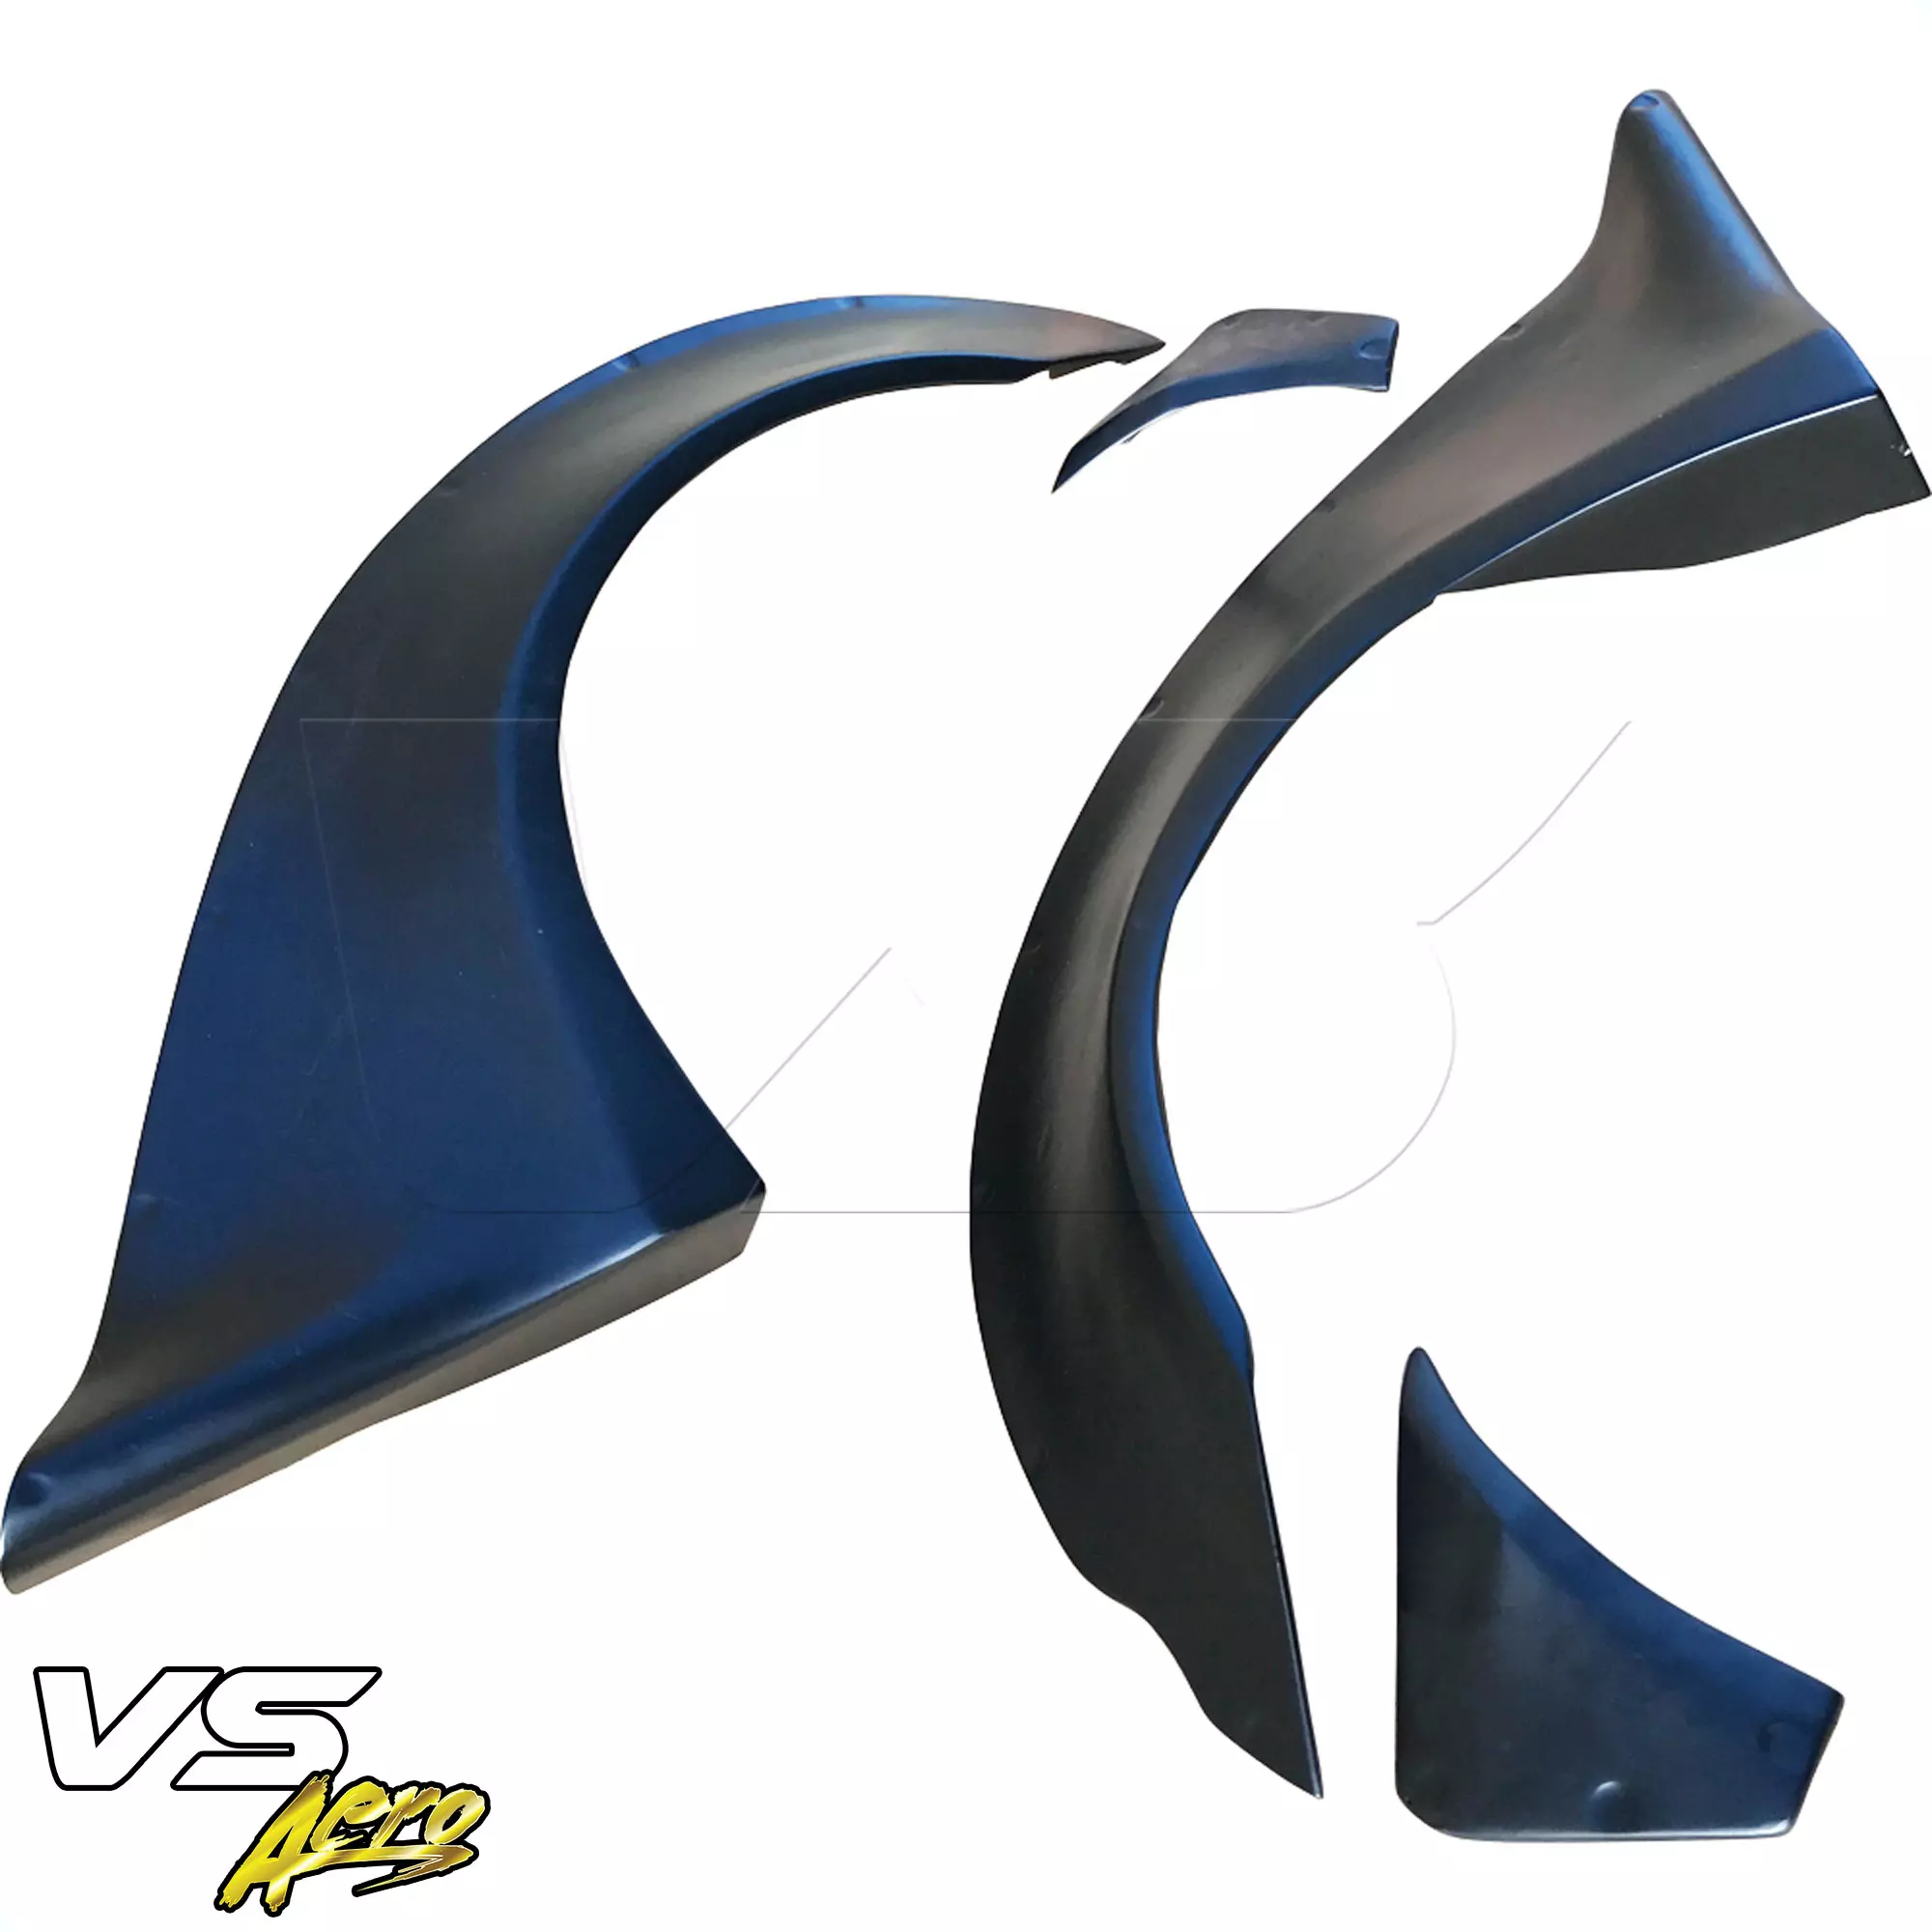 VSaero FRP LBPE Wide Body Fender Flares (rear) 4pc > Infiniti G37 Coupe 2008-2015 > 2dr Coupe - Image 15